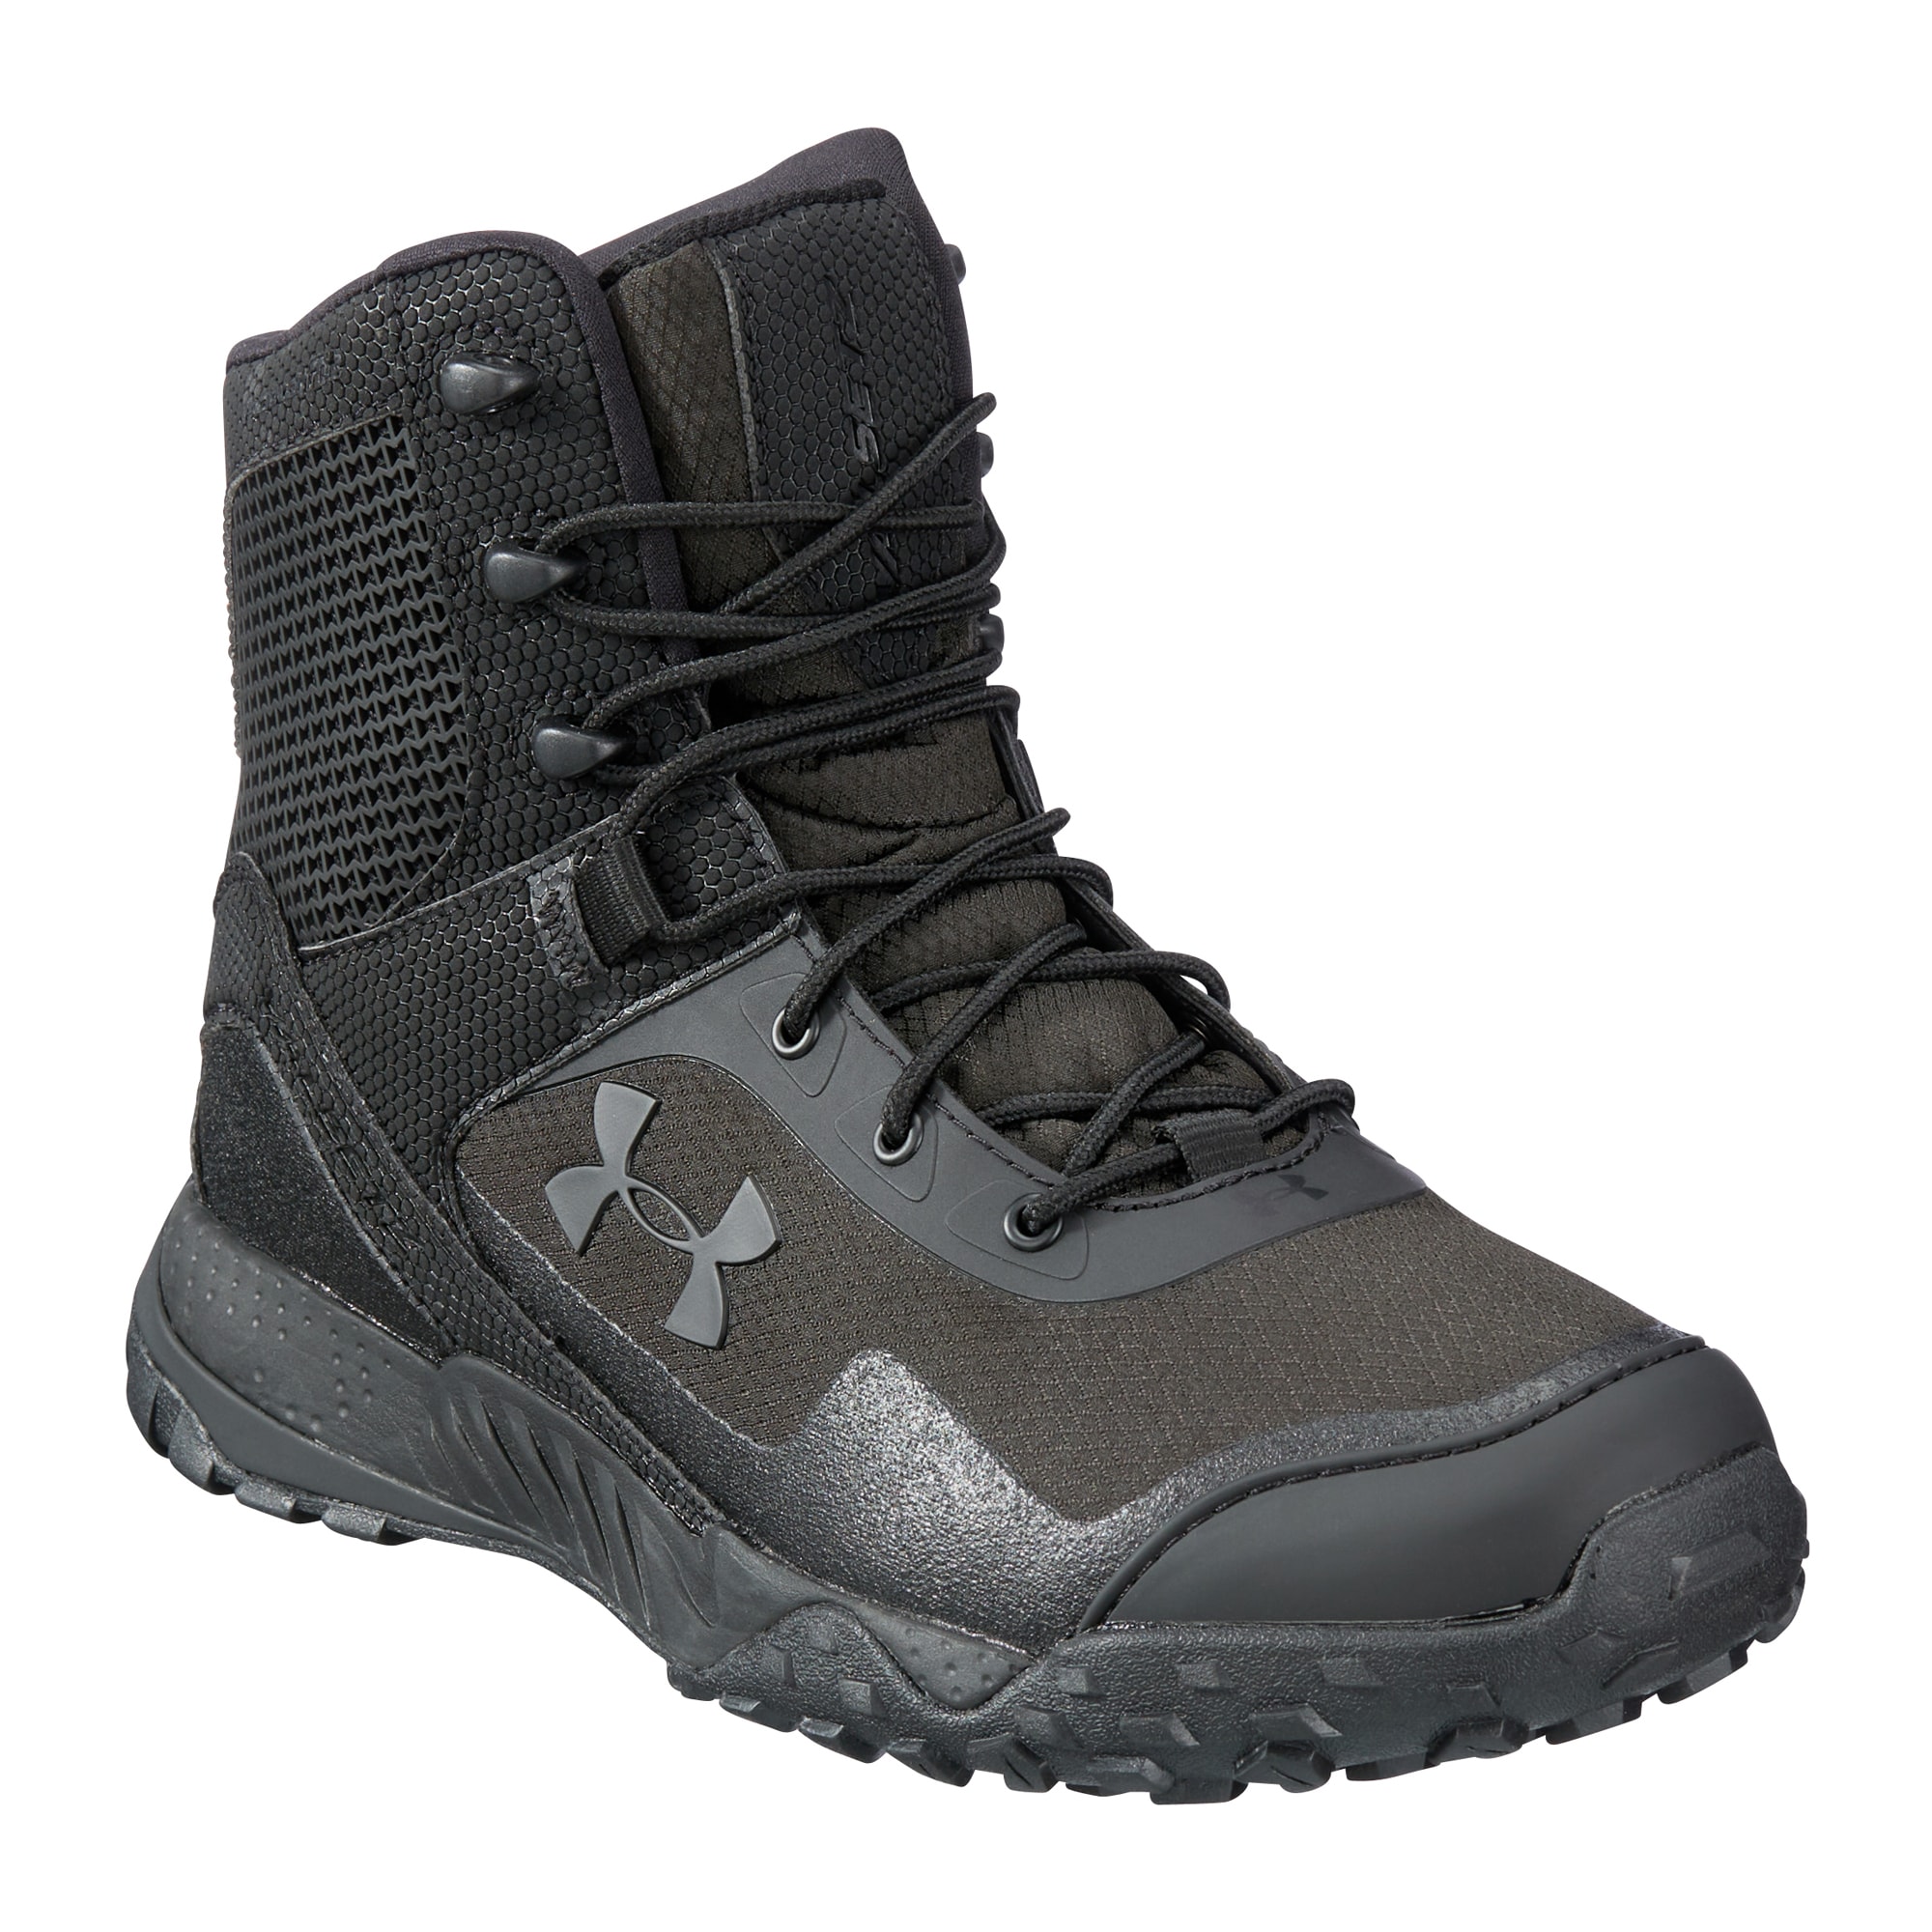 Purchase the Under Armour Tactical Boots Valsetz RTS 1.5 black